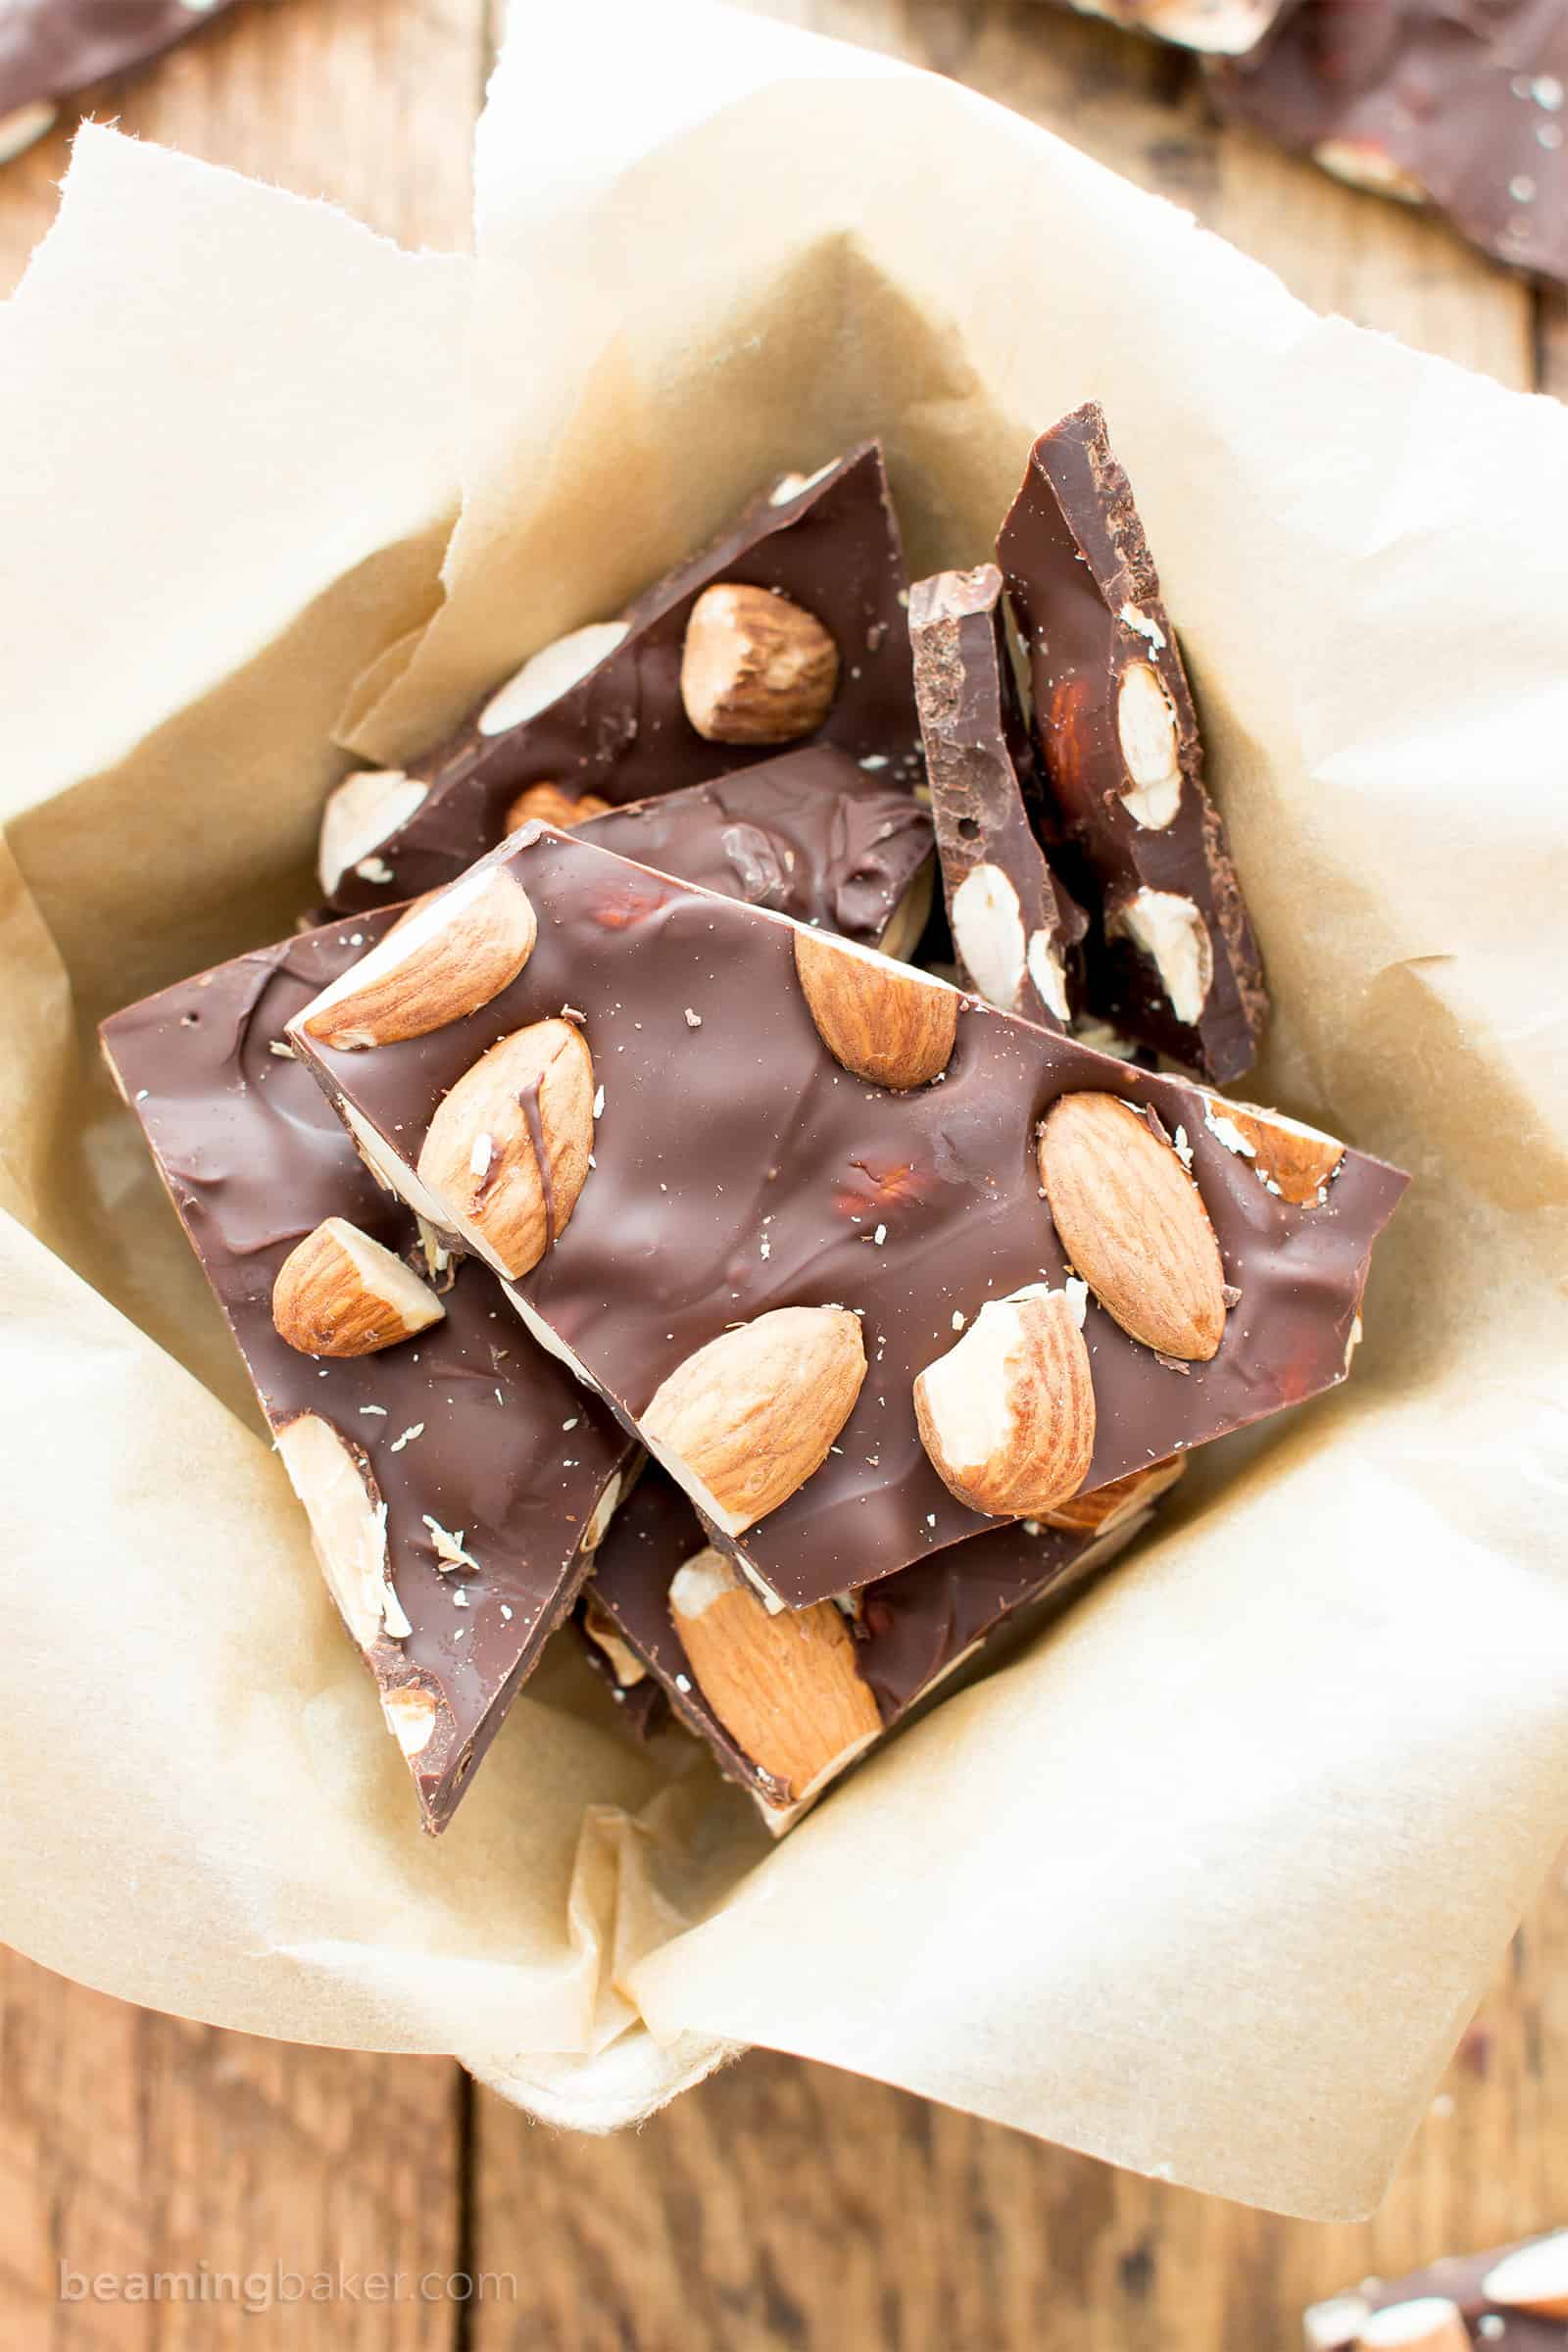 Pieces of chocolate almond bark in a basket lined with parchment paper, sitting on a wooden table